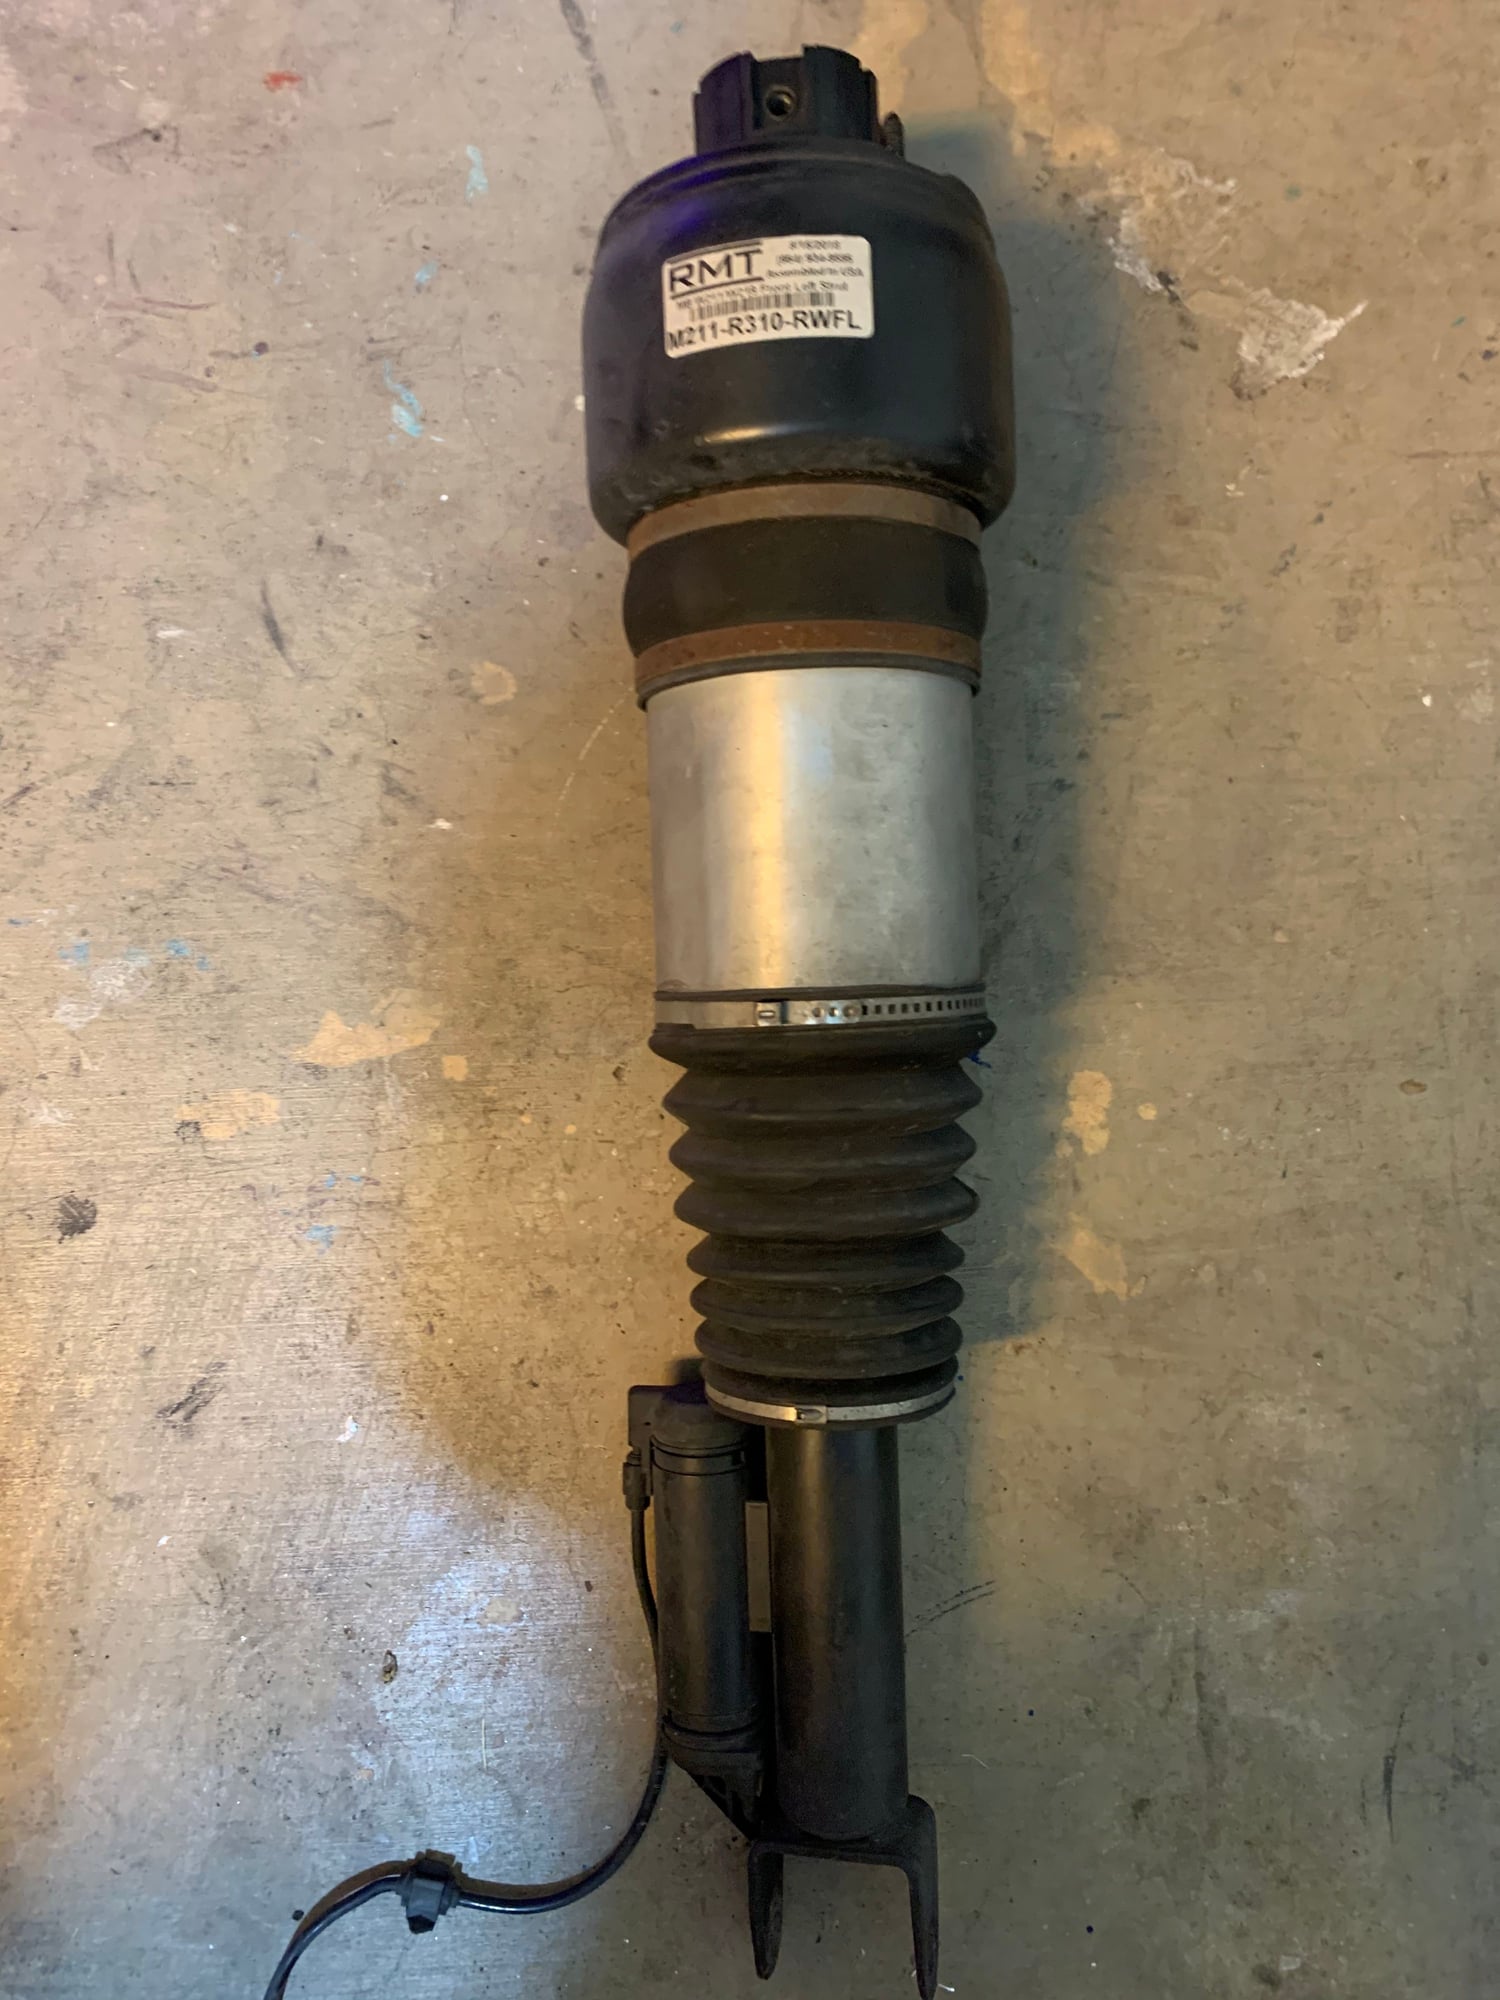 Steering/Suspension - W211 E500 front left RMT airmatic shock one year old - Used - 2003 to 2006 Mercedes-Benz E500 - Austin, TX 78729, United States